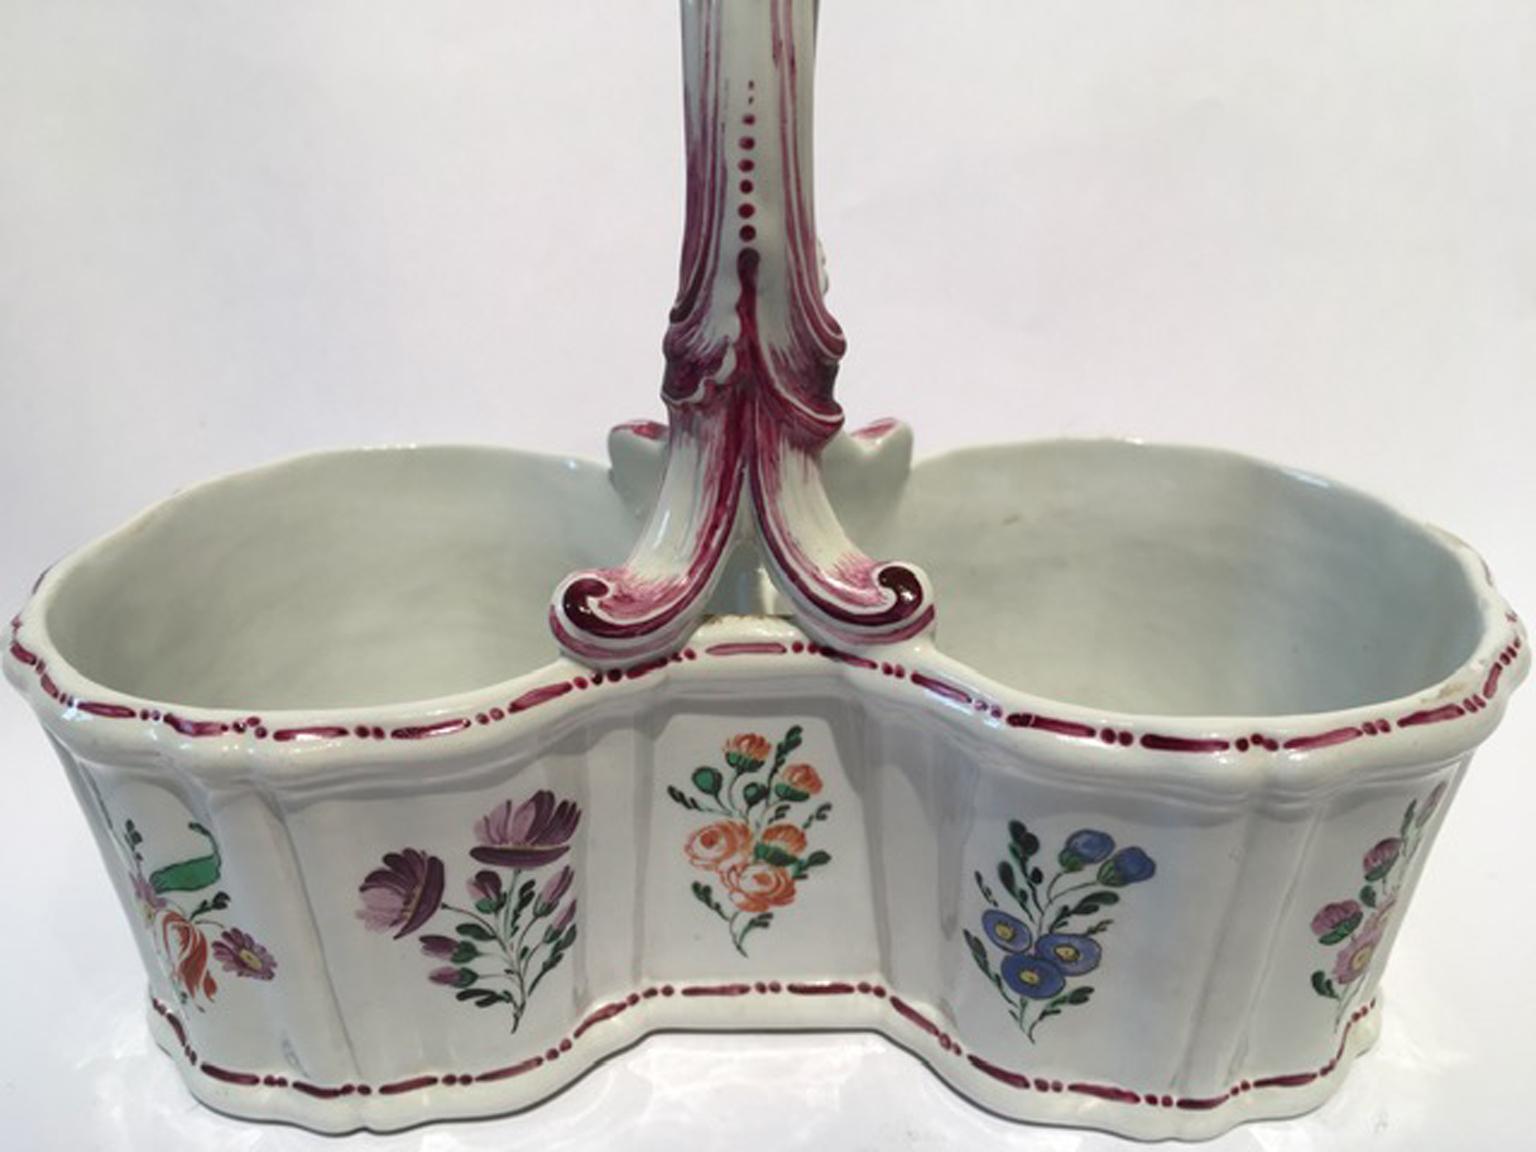 Italy 18th Century Richard Ginori Porcelain Cruet with Floral Drawings For Sale 1